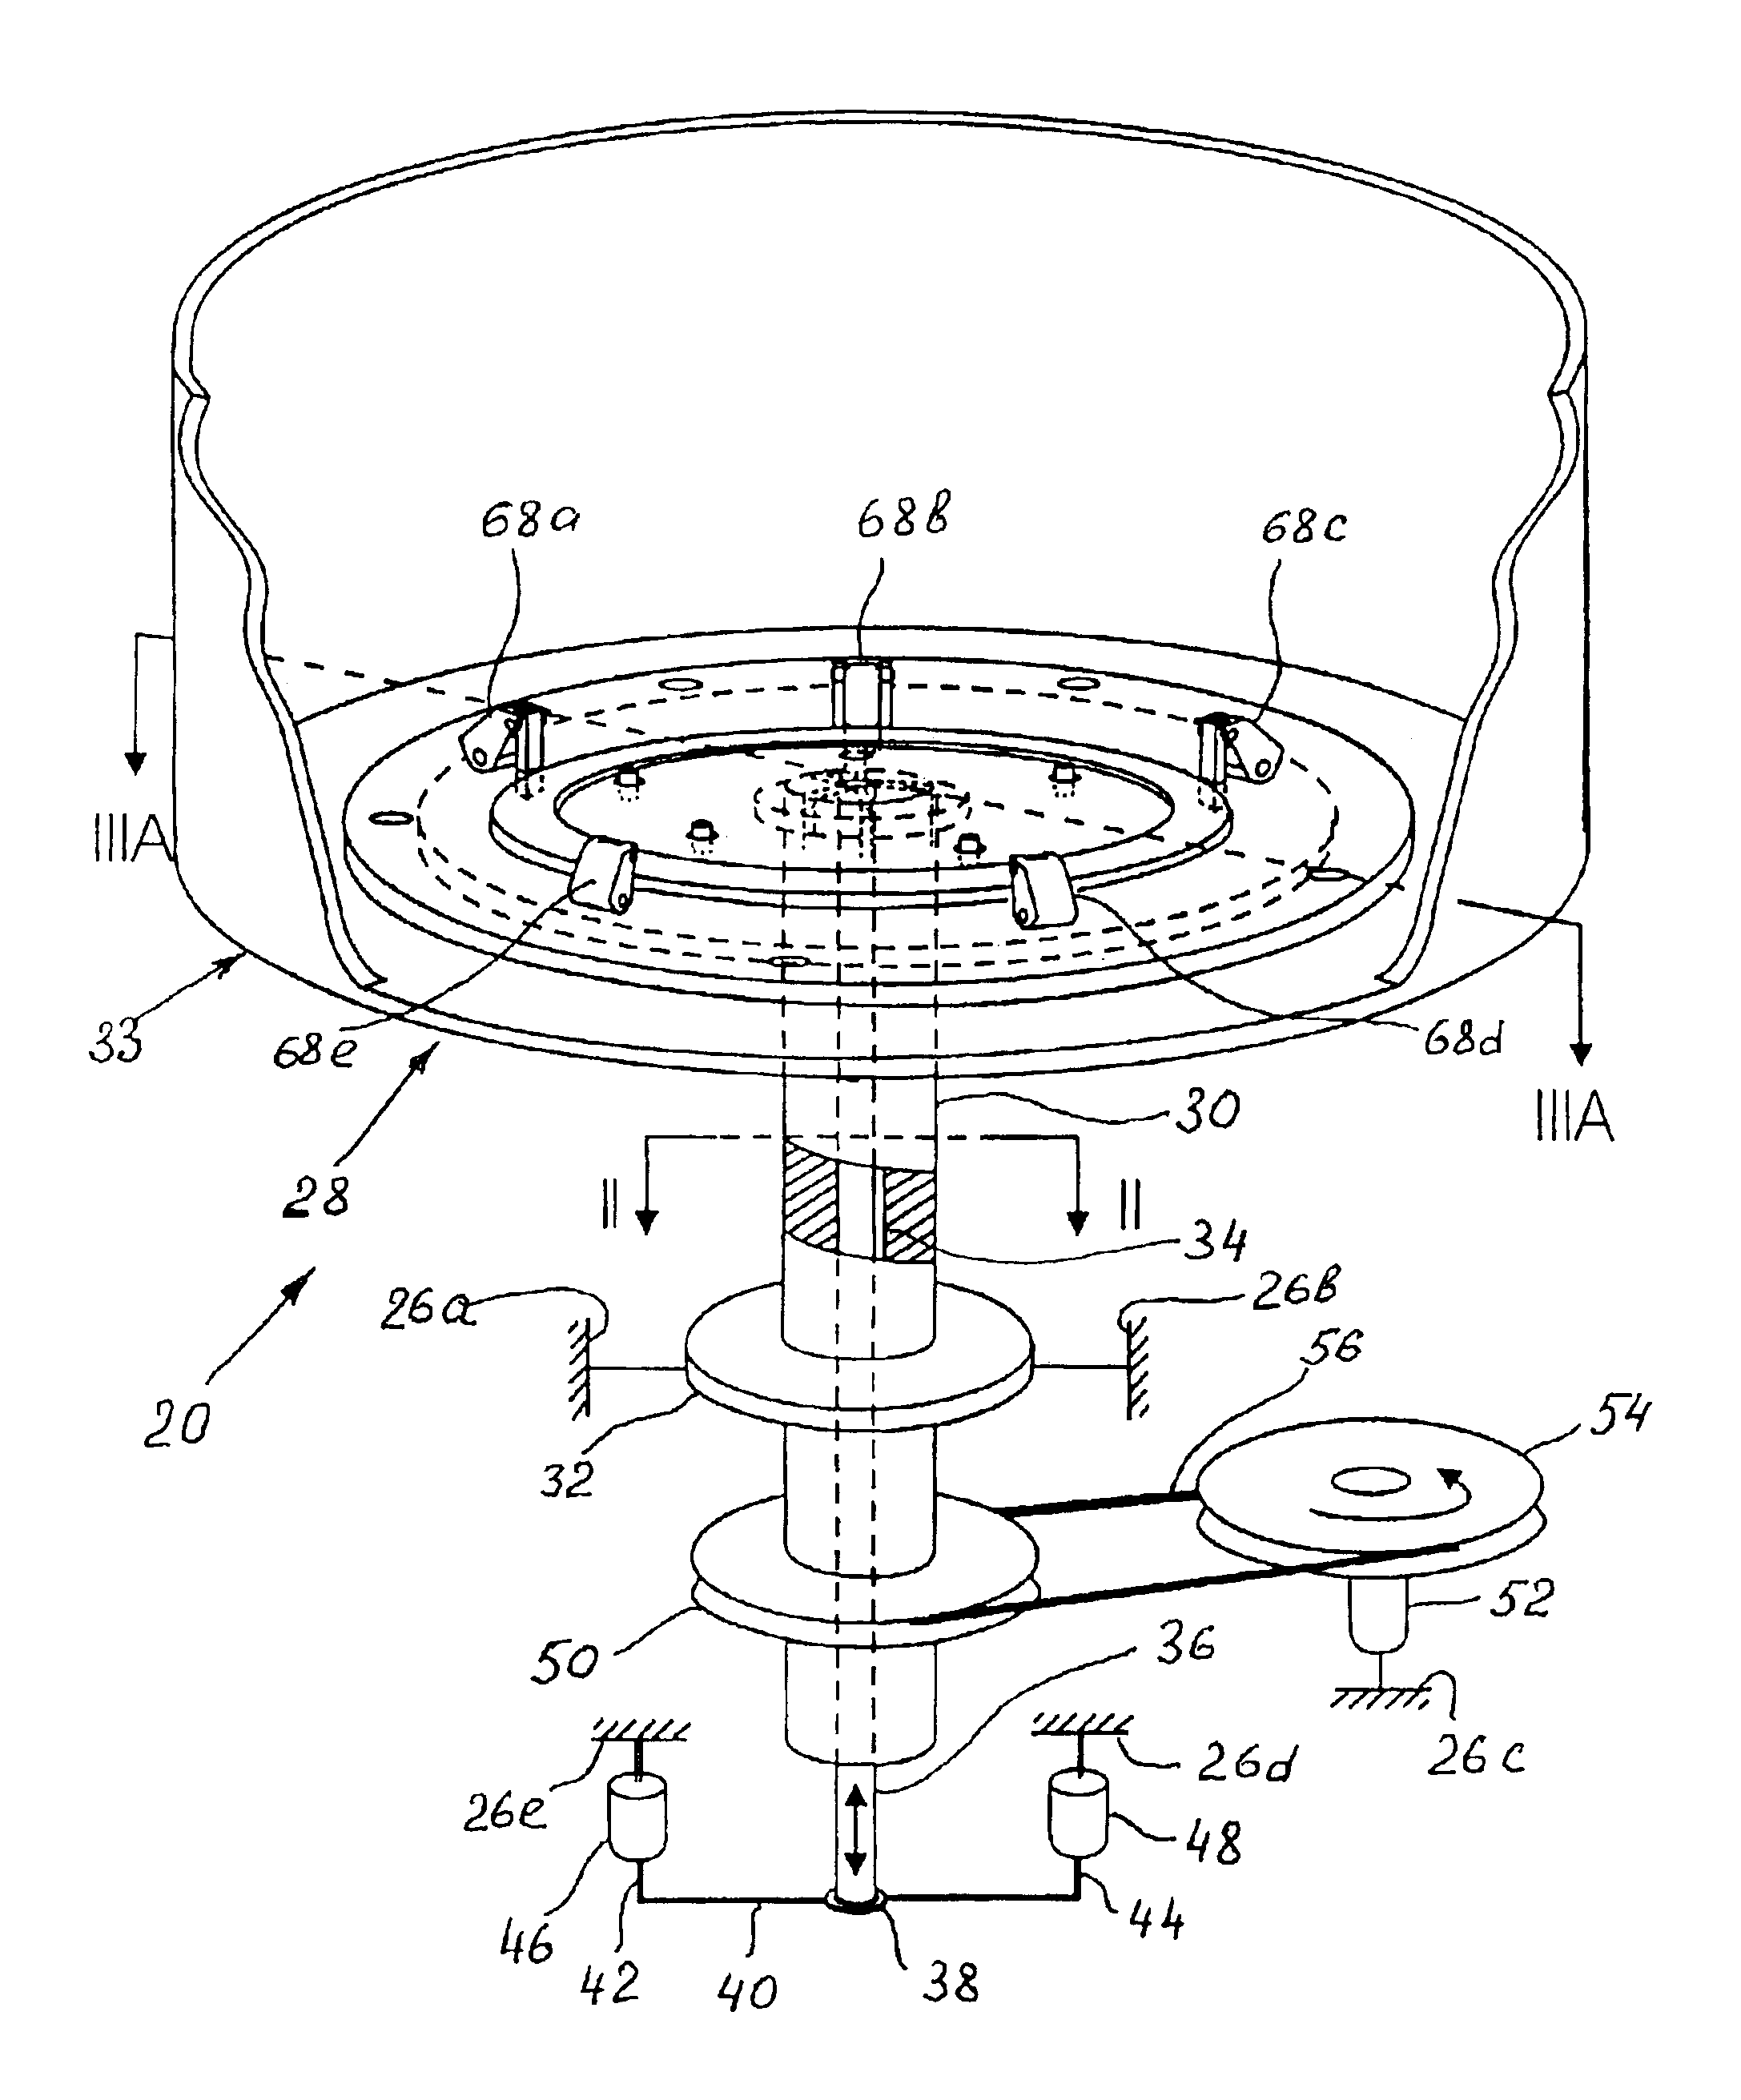 Universal substrate holder for treating objects in fluids